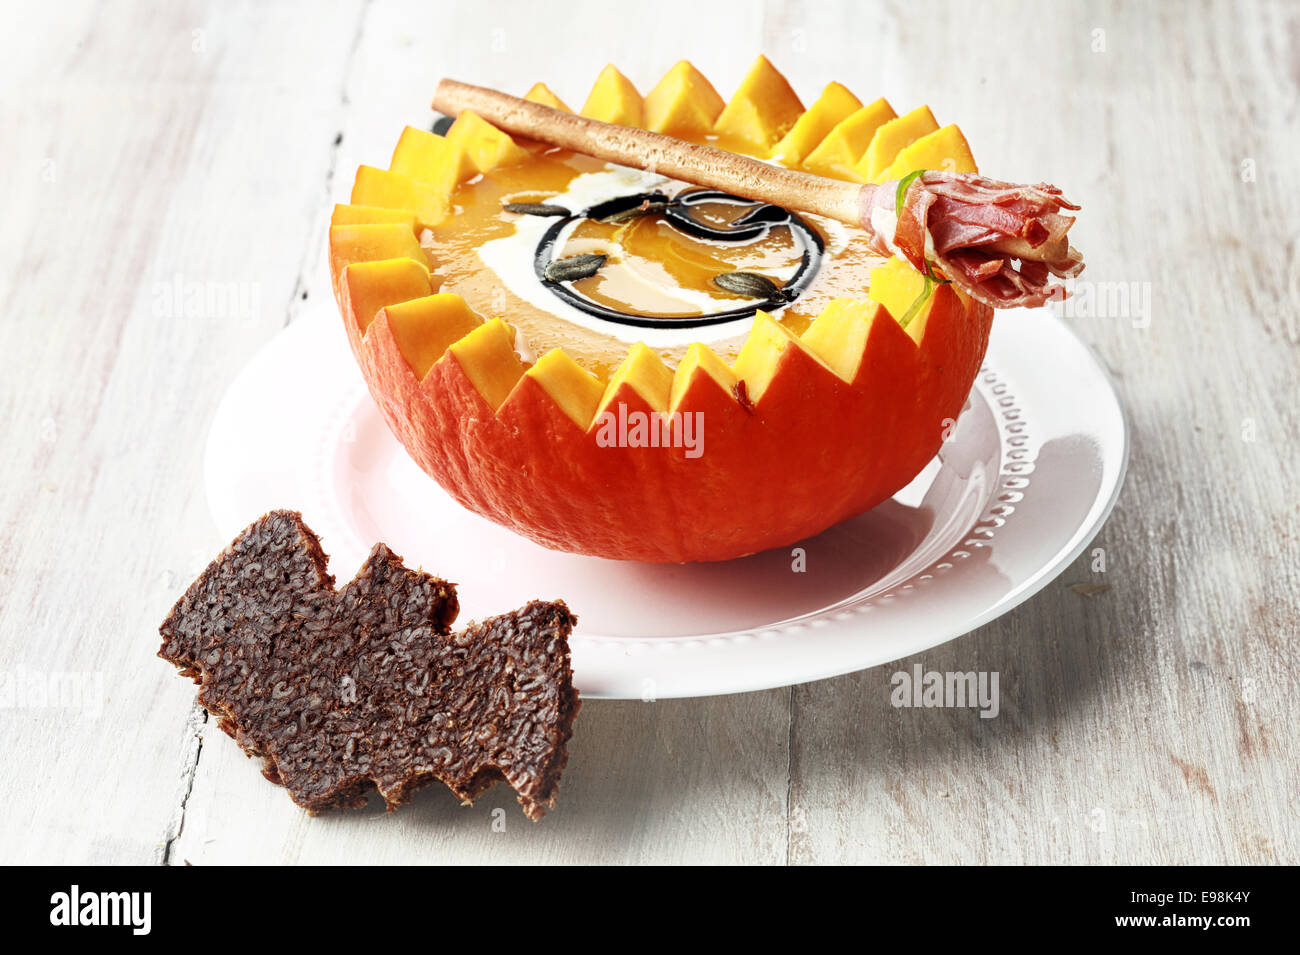 Pumpkin Soup with Bat Crouton Toast Served in Half a Pumpkin with Broomstick Breadstick Stock Photo